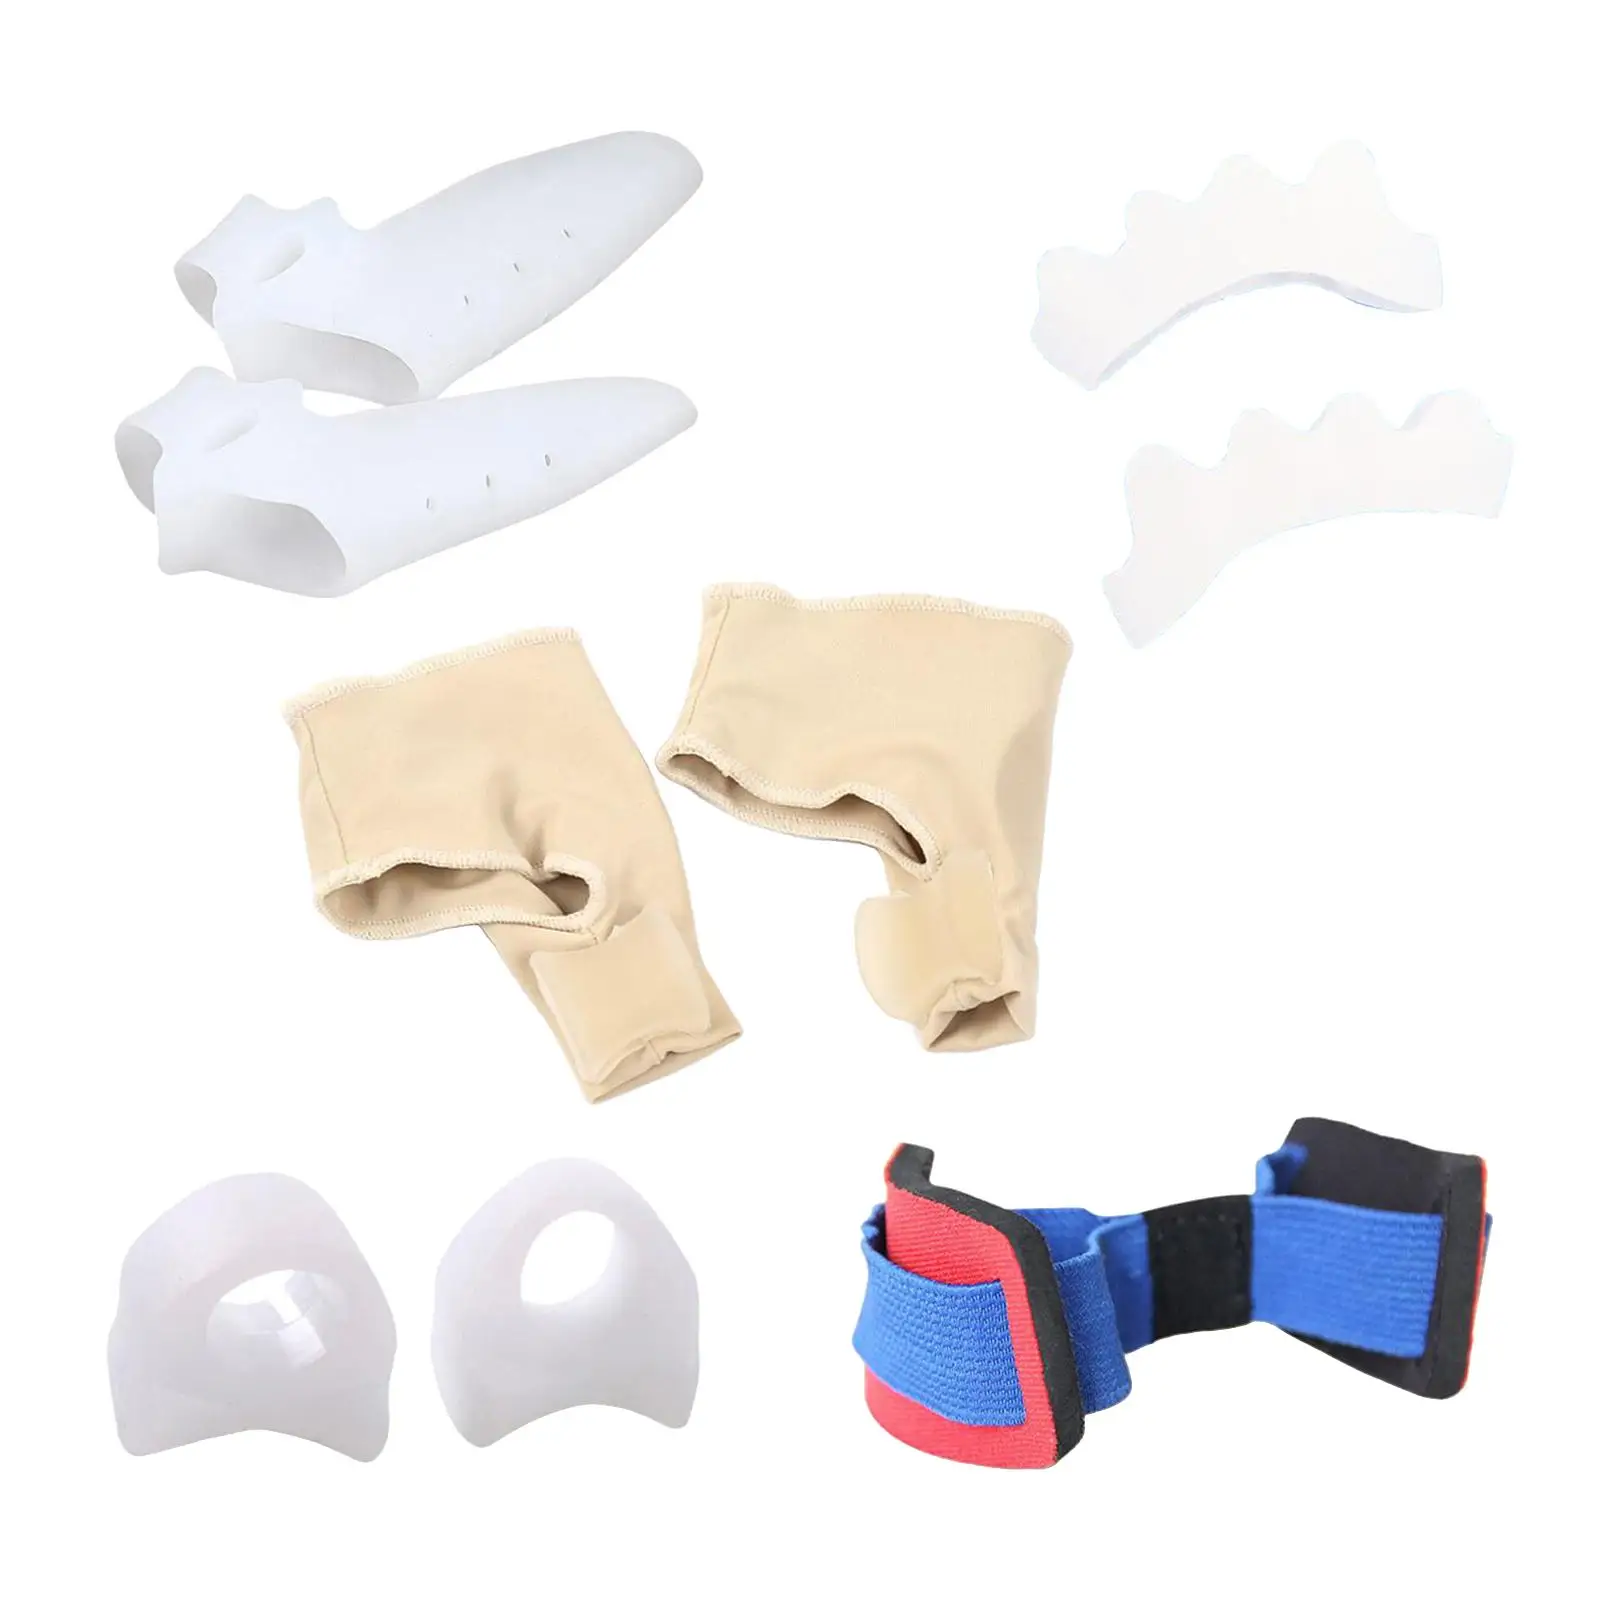 Bunion Corrector Bunion Relief Sleeves Kit, Stretchable , Reduce Pressure and Friction Between Toes and Shoes Toe Straightener